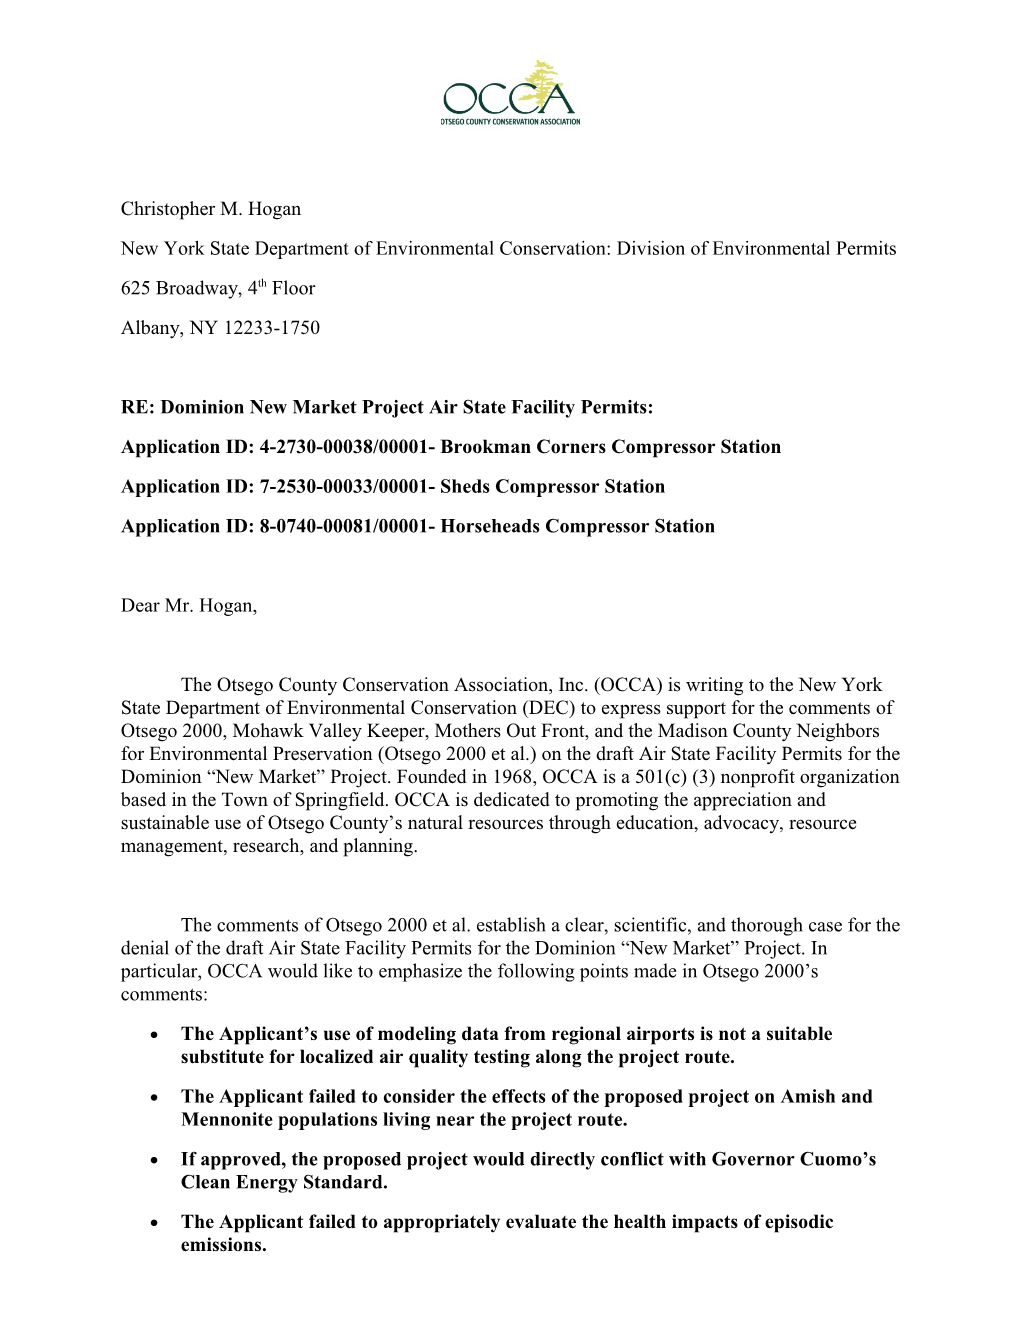 New York State Department of Environmental Conservation: Division of Environmental Permits